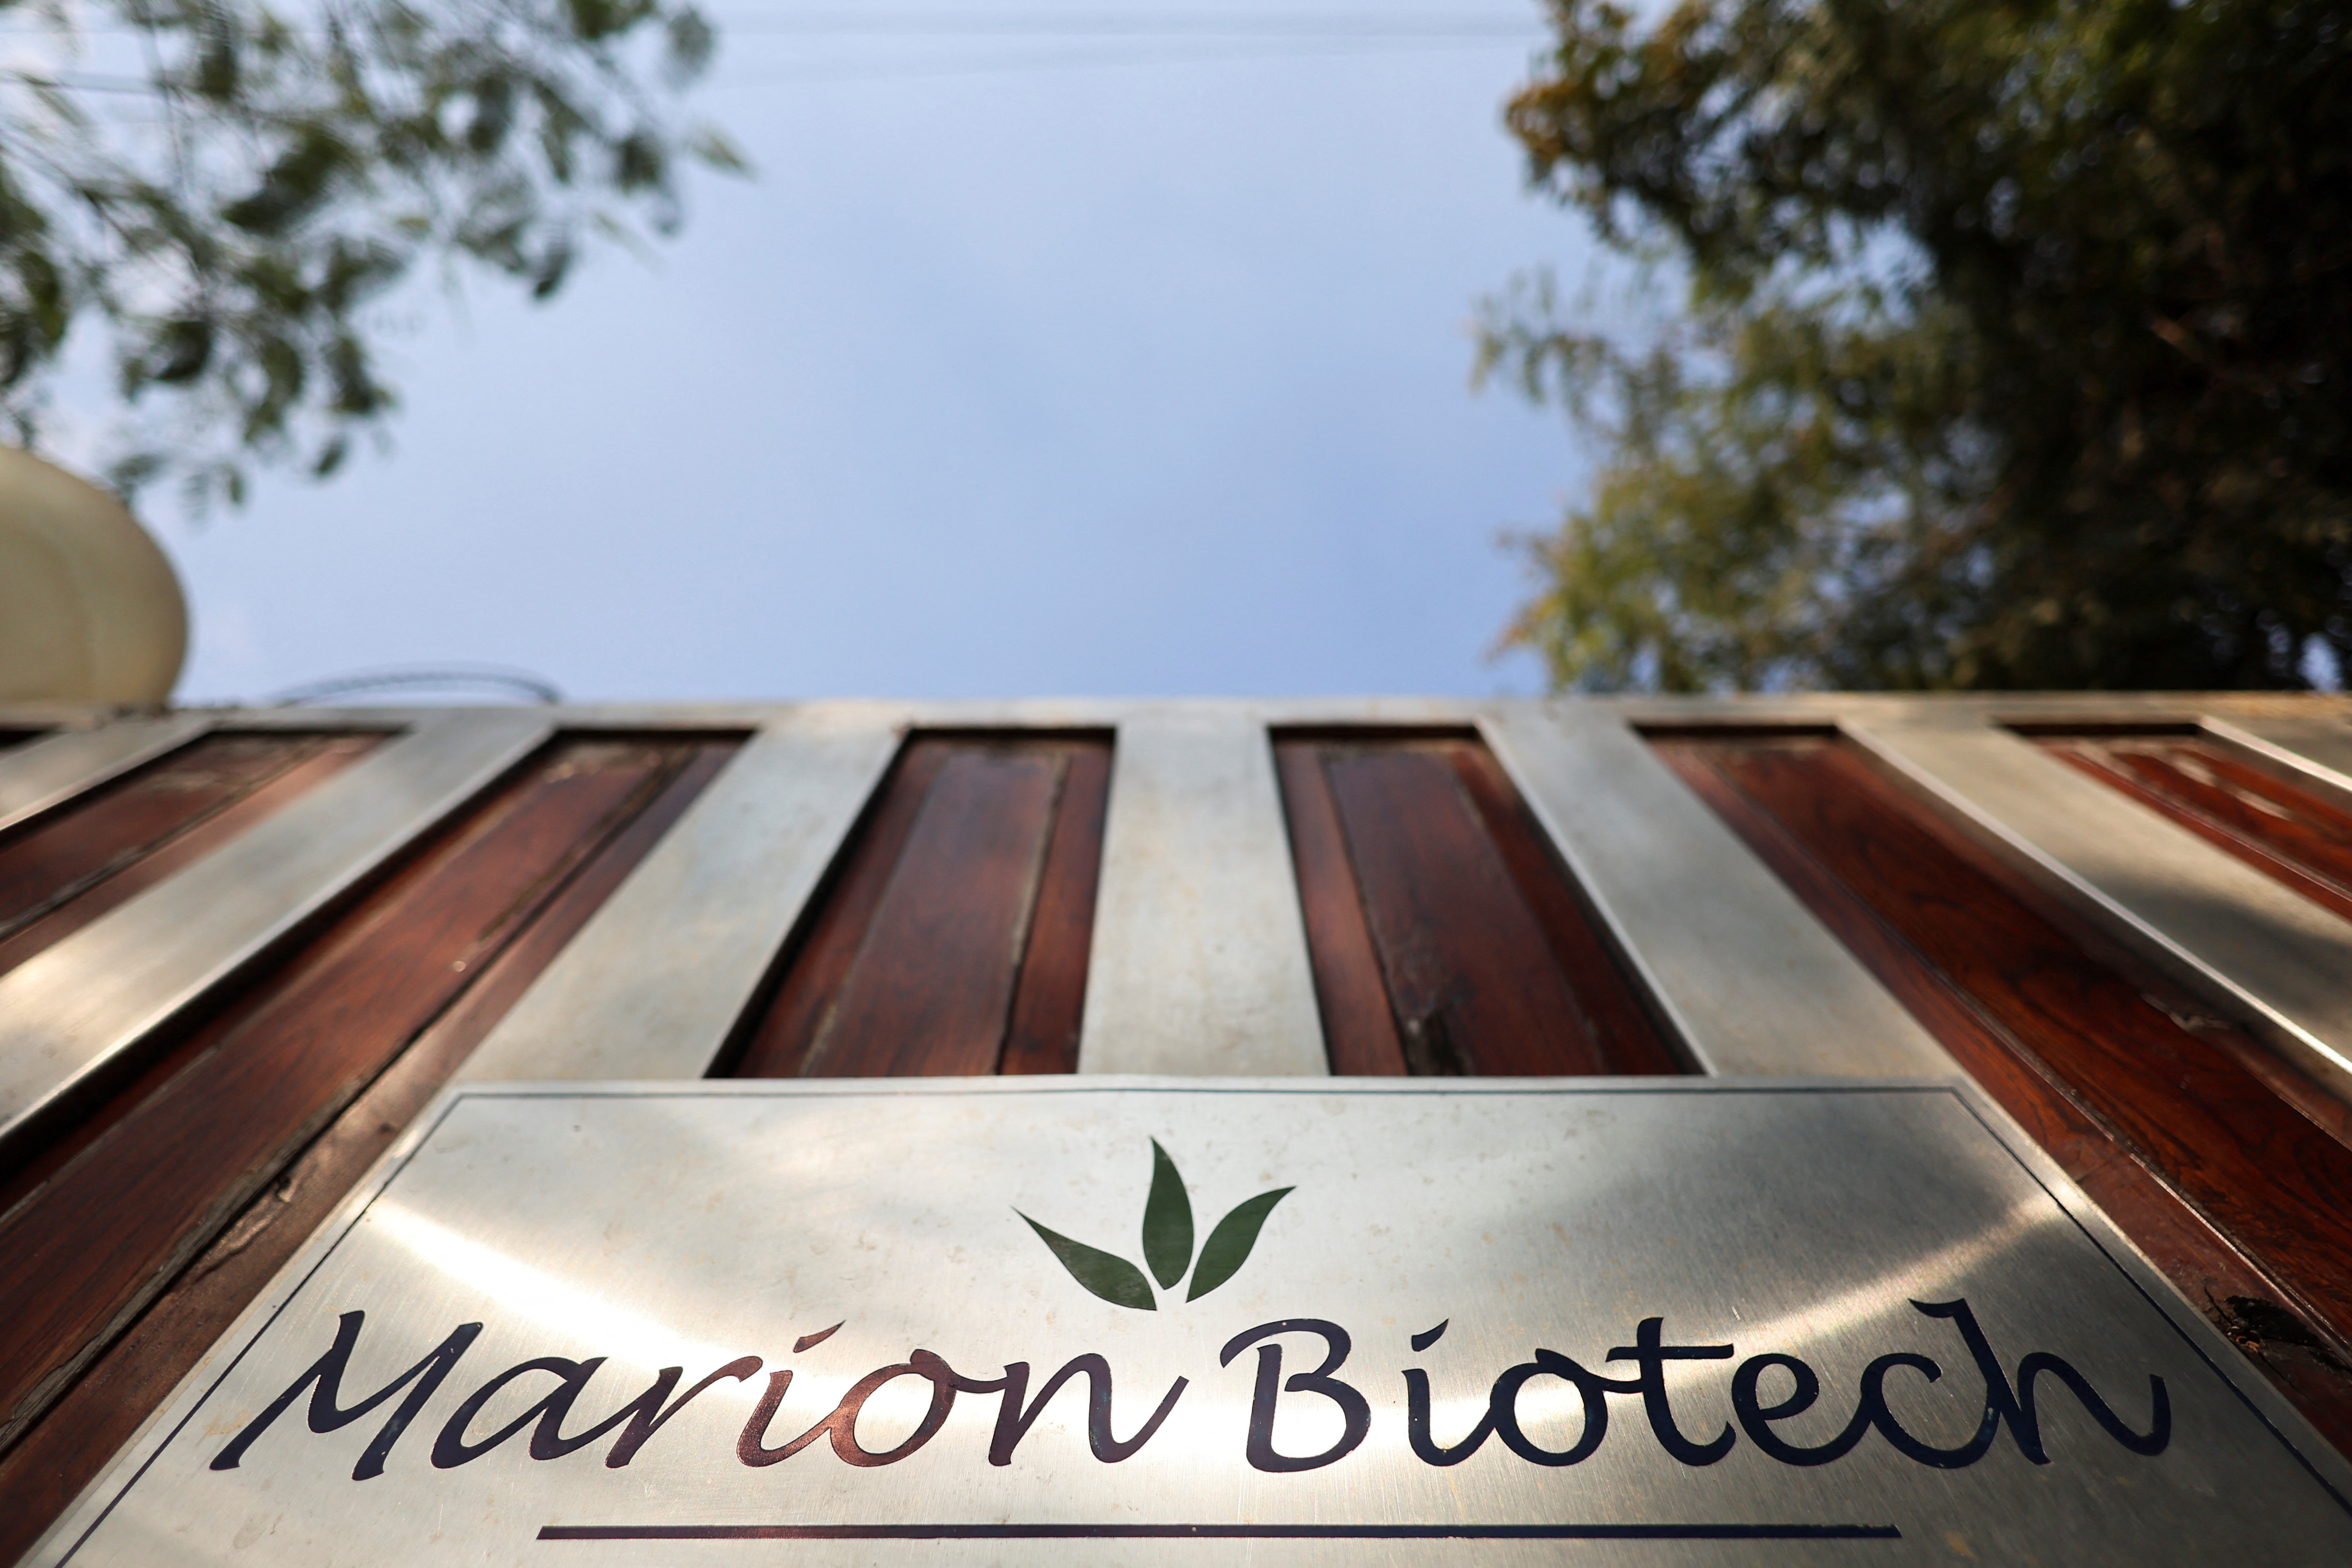 The logo of Marion Biotech, a healthcare and pharmaceutical company, is seen on the front door of its office in Noida.